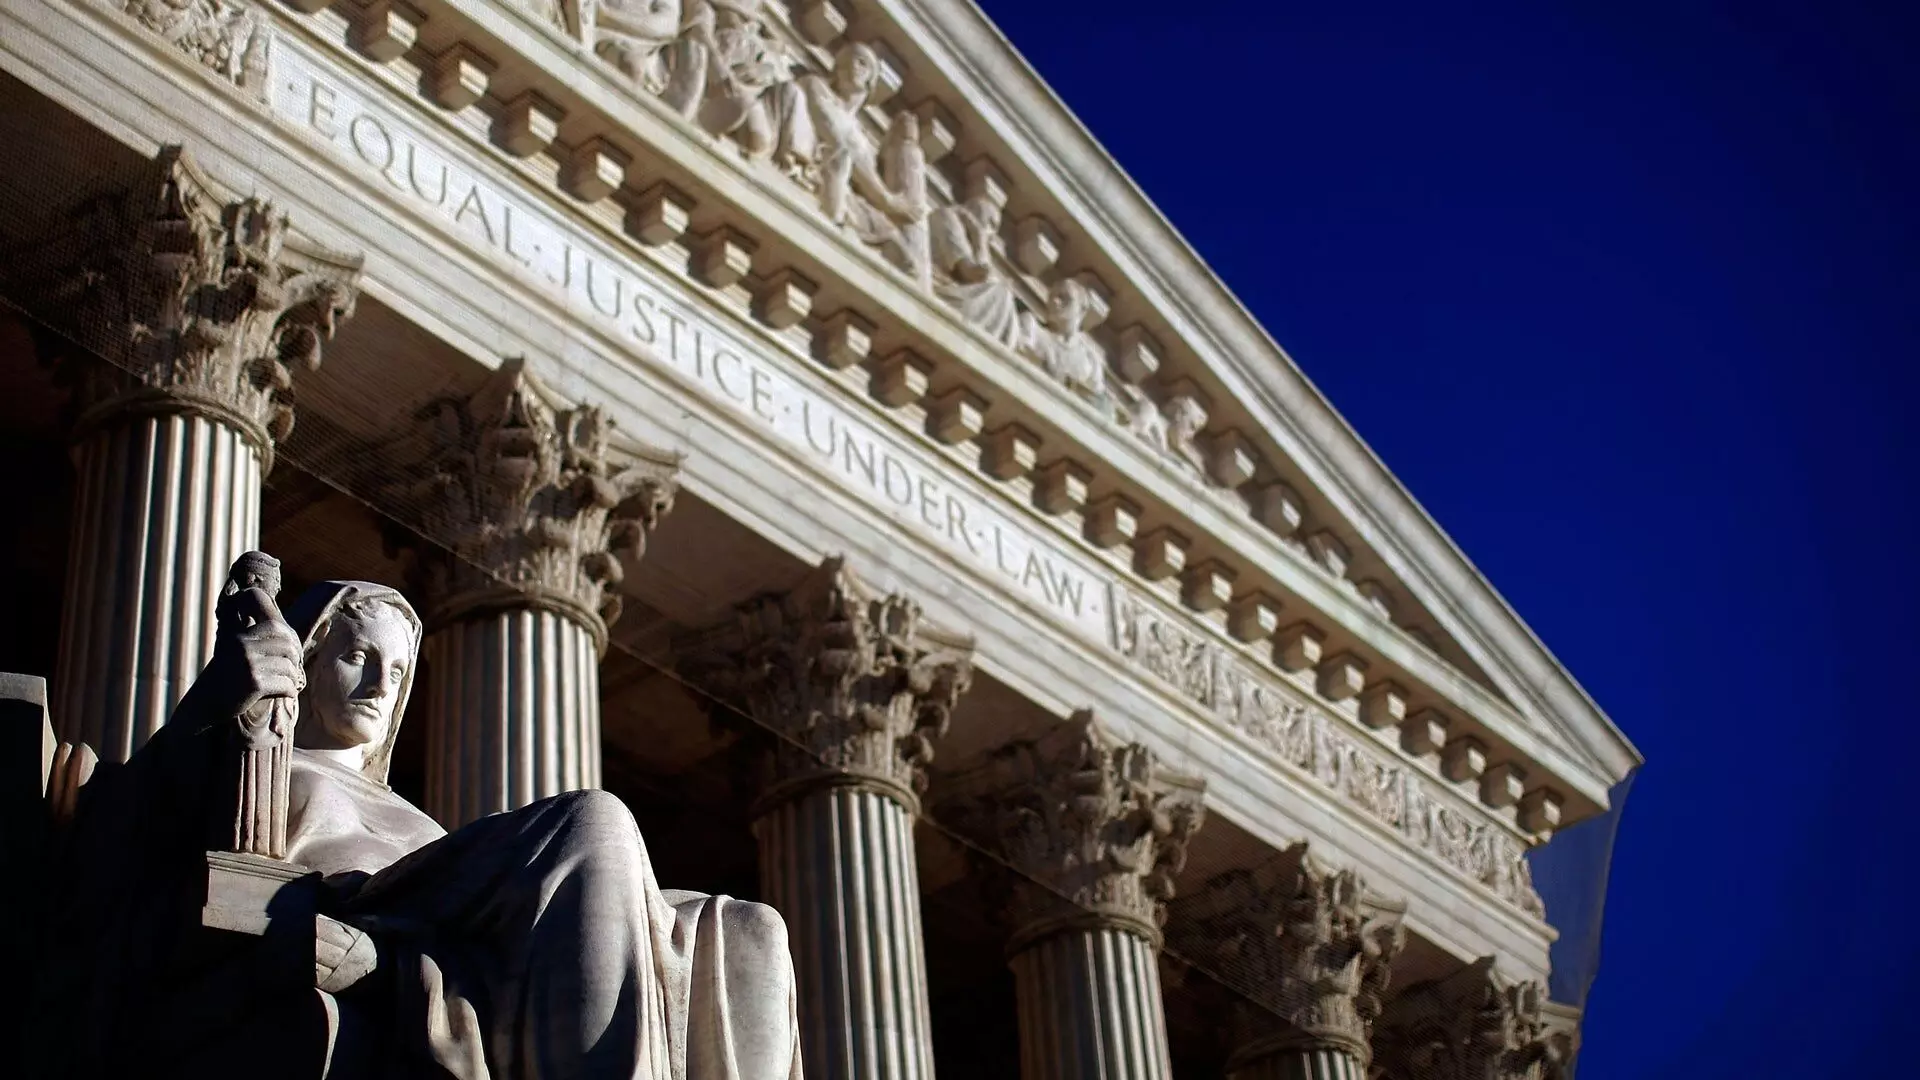 U.S. Supreme Court bans affirmative action in college admissions